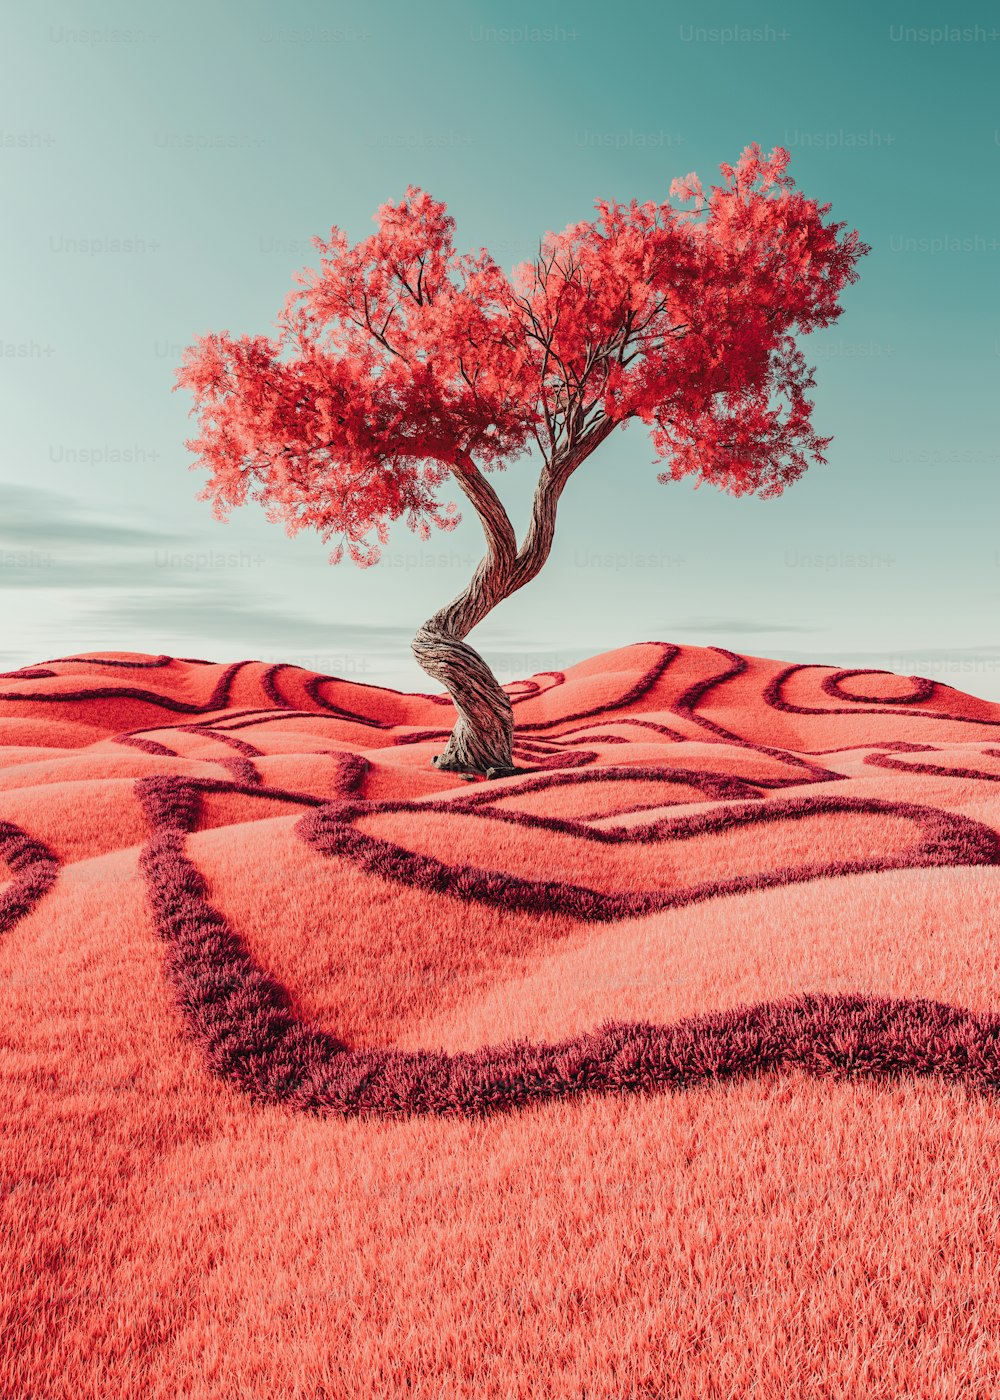 a lone tree in the middle of a red field